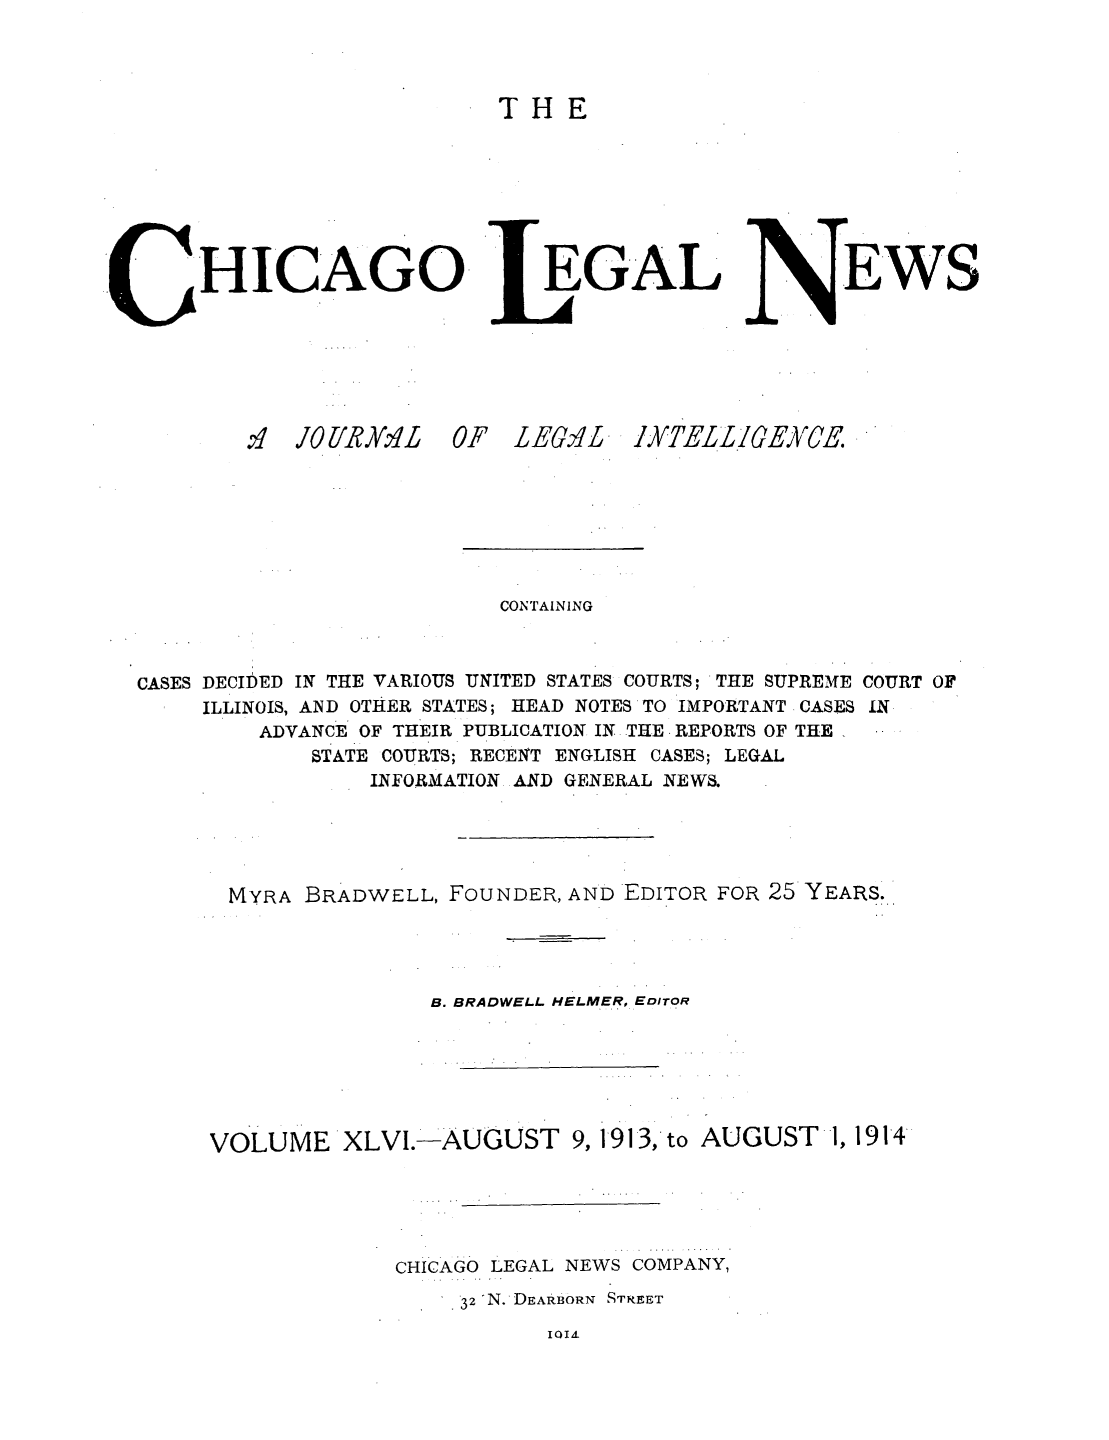 handle is hein.journals/chiclene46 and id is 1 raw text is: THEHICAGO'fI  JOlIRvlI  0EGALF LEG'LEWSCONTAININGCASES DECIDED IN THE VARIOUS UNITED STATES COURTS; THE SUPREMEILLINOIS, AND OTHER STATES; HEAD NOTES'TO IMPORTANT CASESADVANCE OF THEIR PUBLICATION IN THE - REPORTS OF THESTATE COURTS; RECENT ENGLISH CASES; LEGALINFORMATION AND GENERAL NEWS.COURT OFINMYRA BRADWELL, FOUNDER, AND EDITOR FOR 25 YEARS.B. BRADWELL HELMER, EDITORVOLUME XLVI.-AUGUST 9, 1913, toCHICAGO LEGAL NEWS COMPANY,32 N. DEARBORN STREETIQI AYT]EL L CE)XVCEAUGUST1, 1914